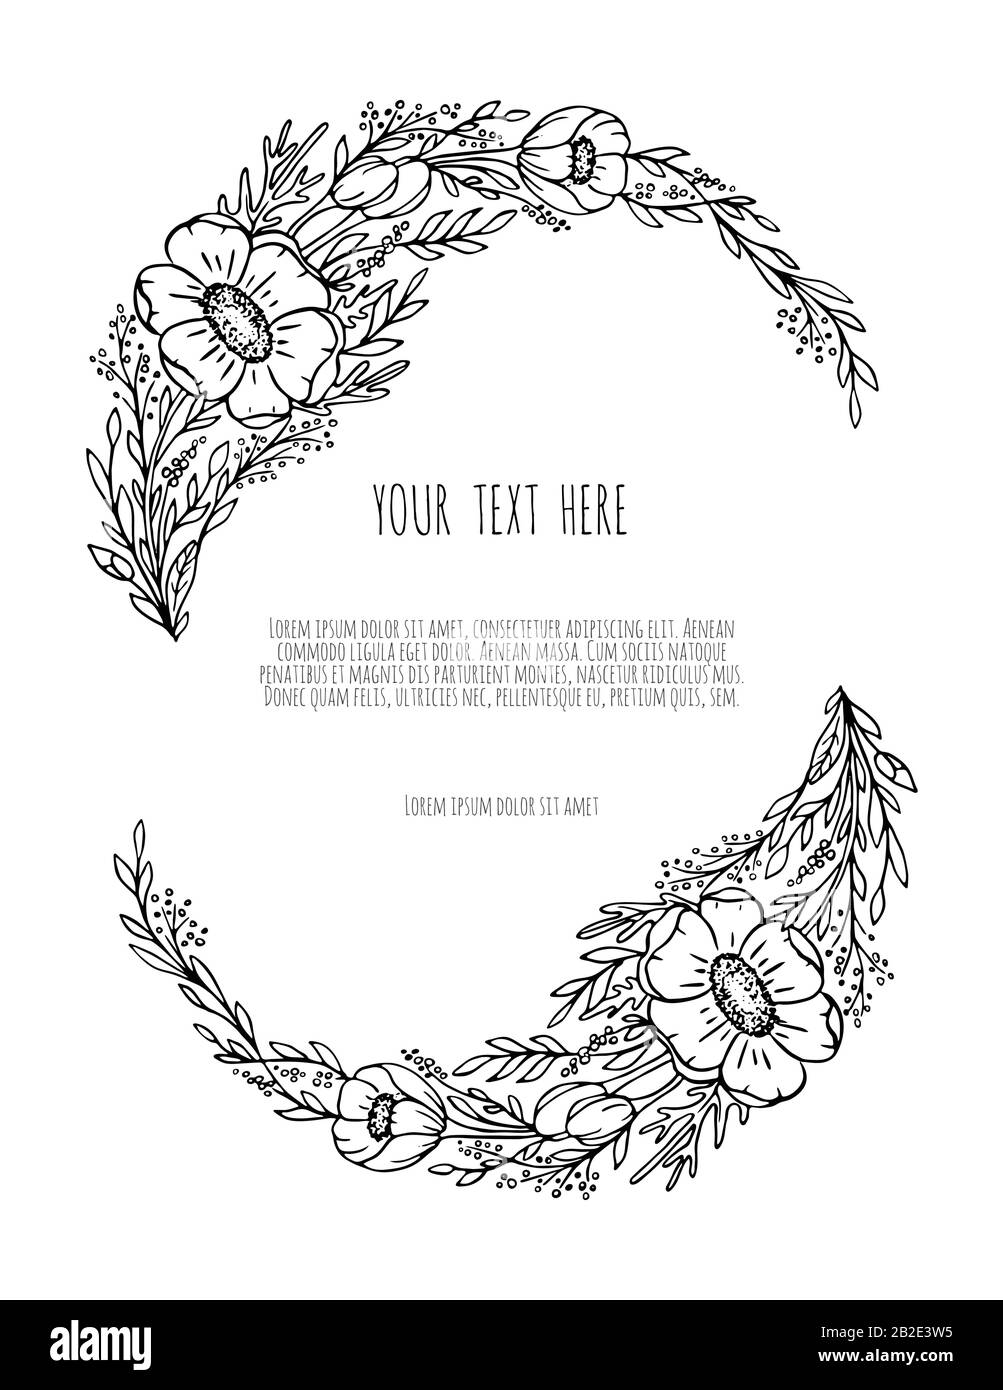 Hand drawn decor with flowers Anemone leaves and branches. Vector nature illustration in vintage style. Stock Vector